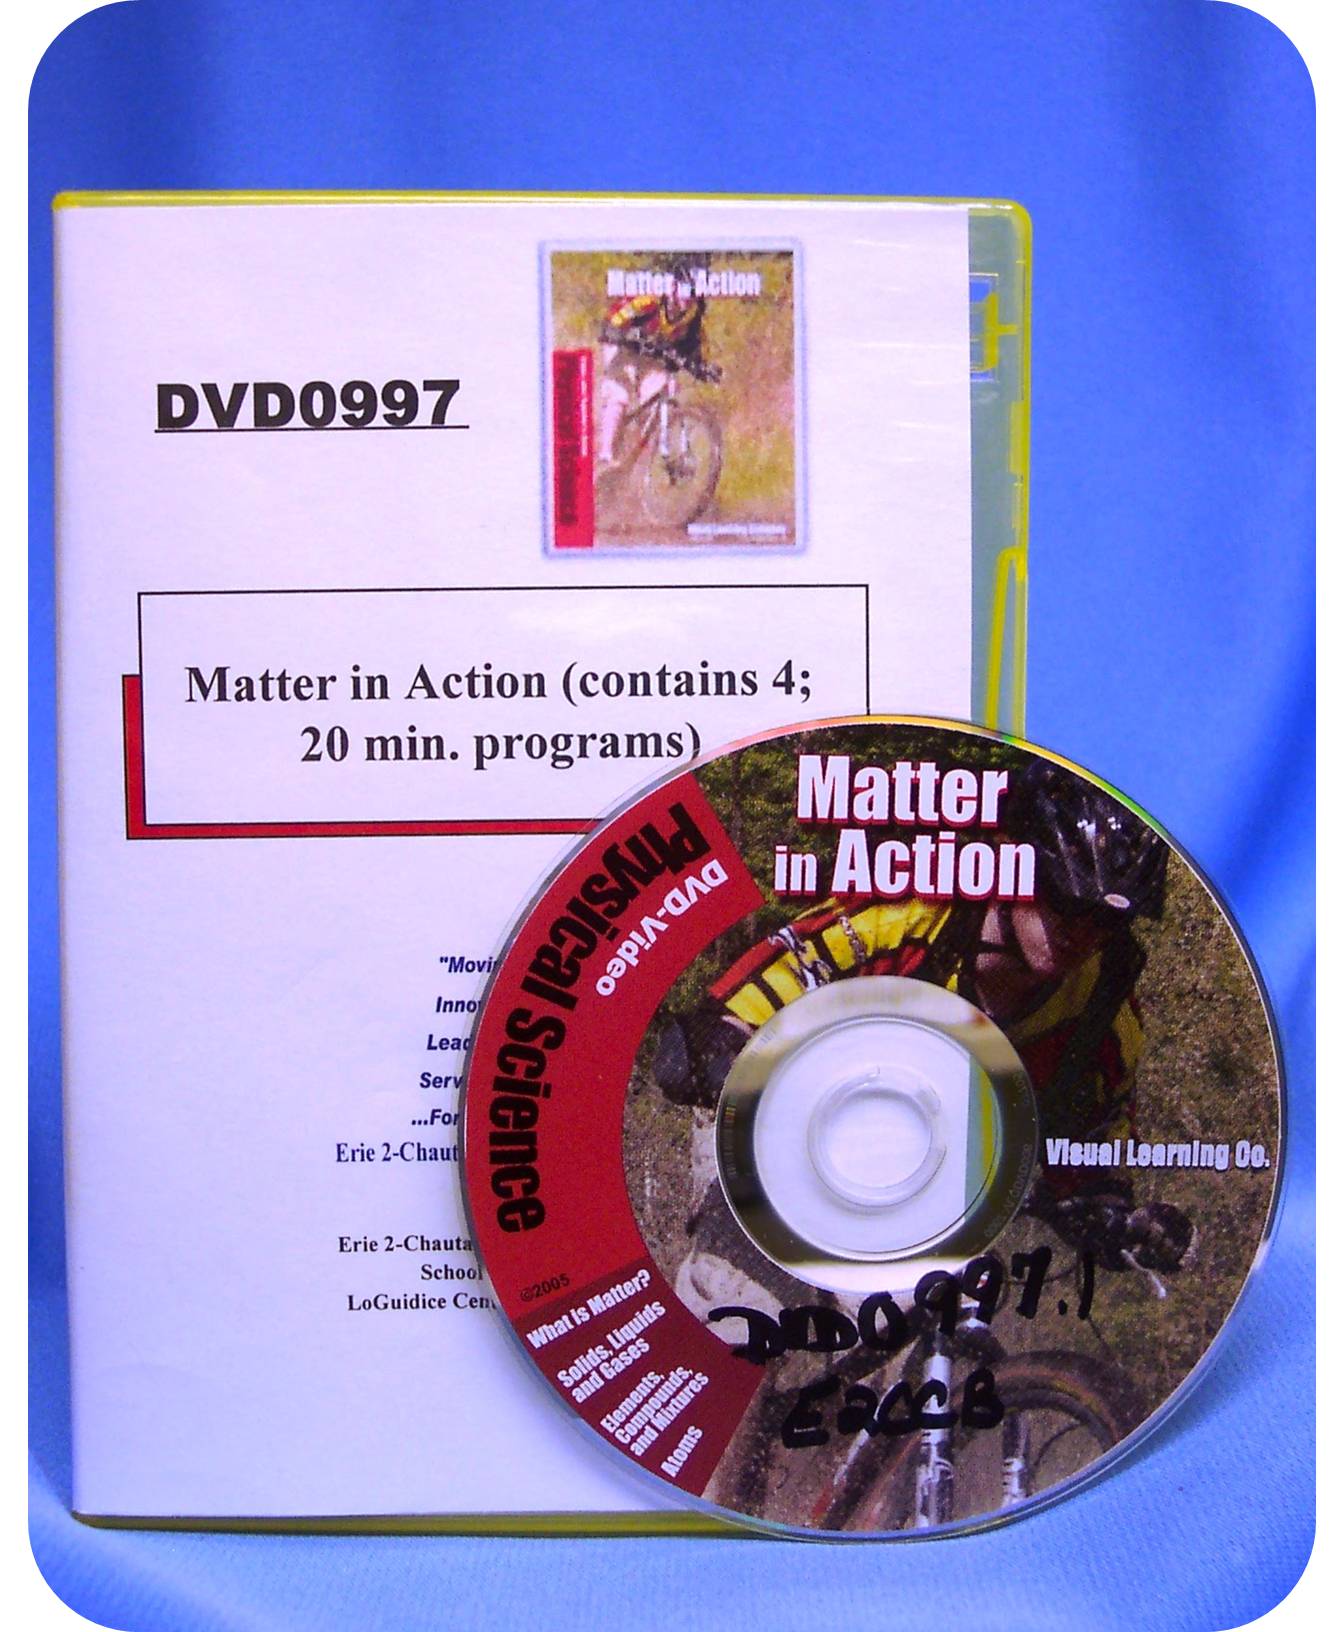 Matter in Action (contains 4; 20 min. programs)